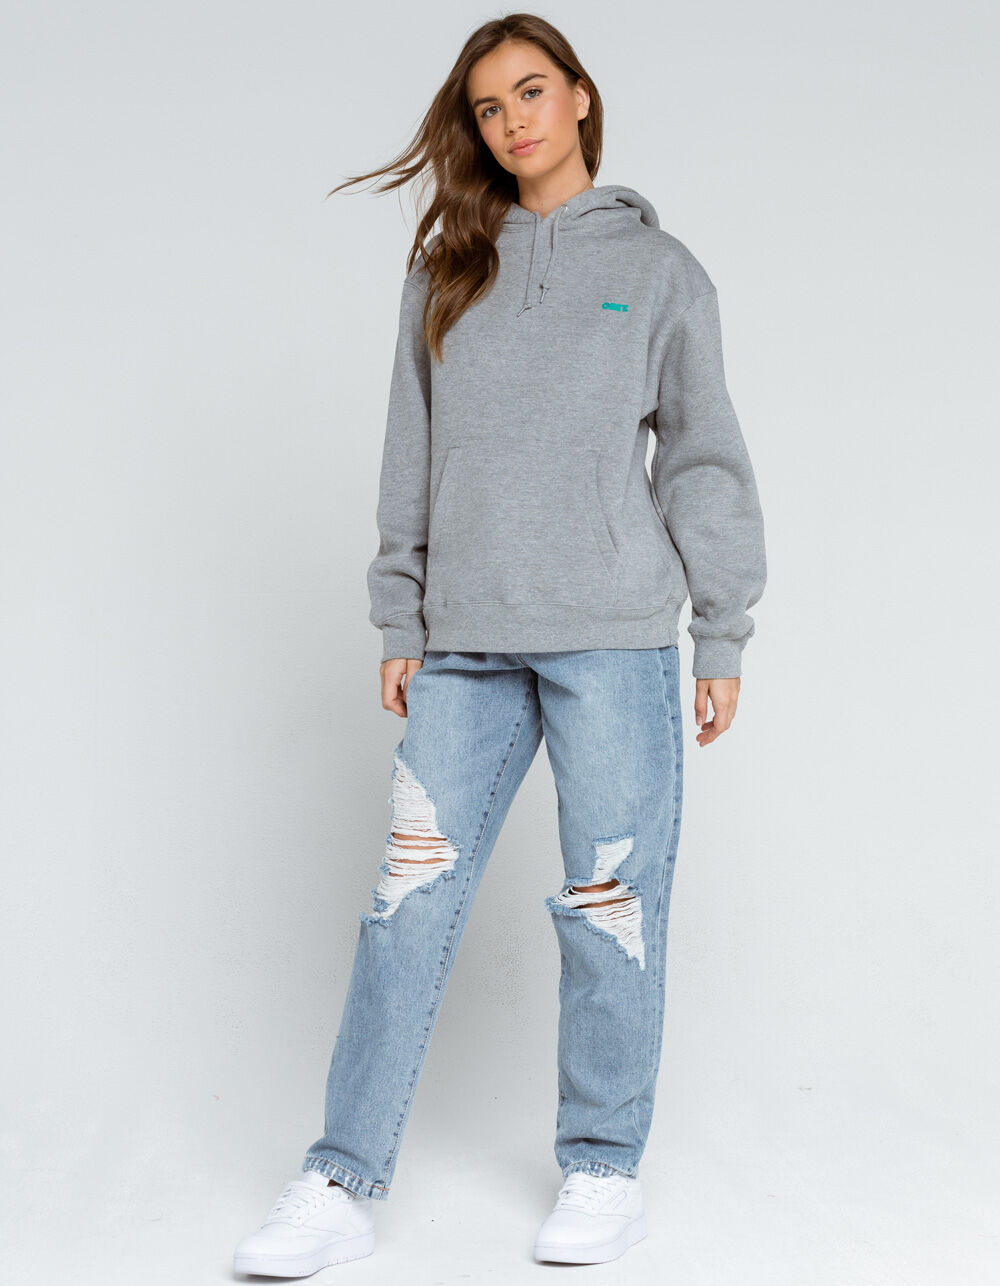 OBEY Chromed Out Womens Heather Gray Hoodie - HEATHER GRAY | Tillys